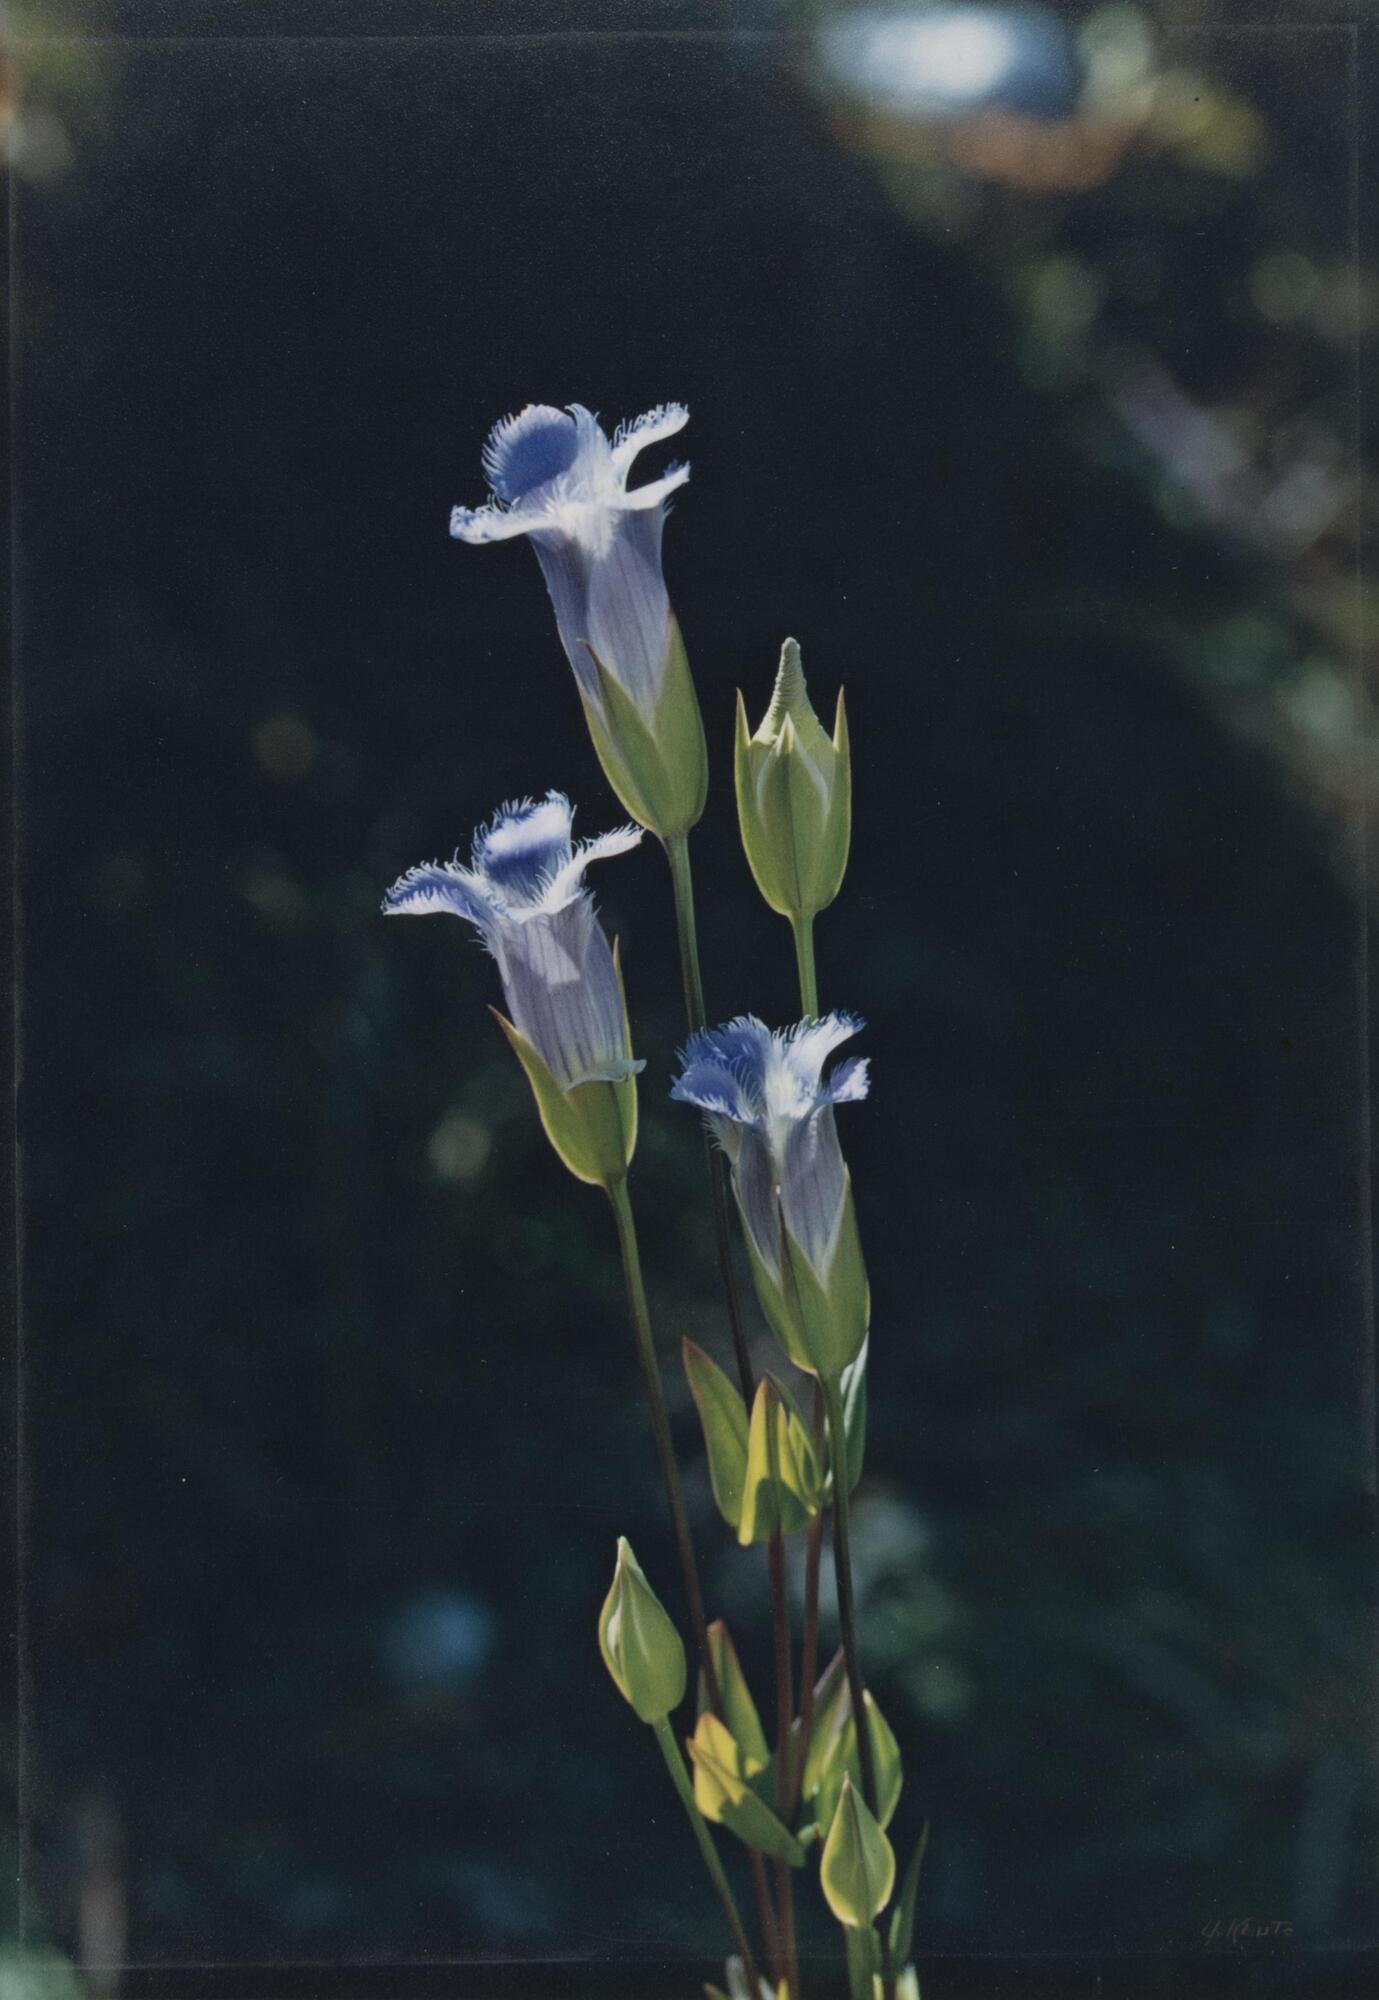 This is a photograph of a stem of a branched plant with three light-blue flowers in bloom against a dark background. The image has a very shallow depth of field.